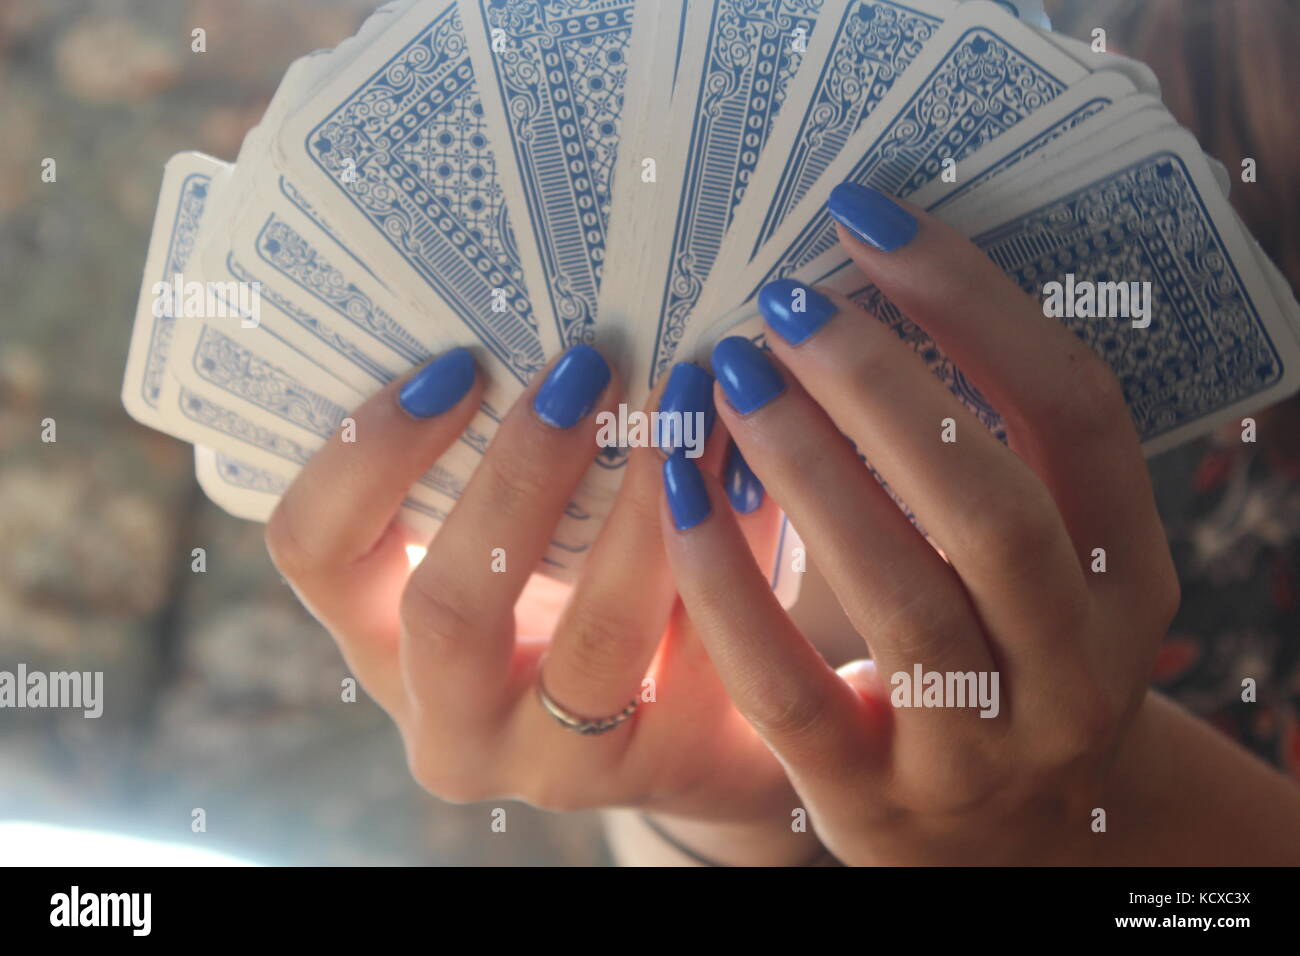 Female hands with blue fingernails spread pack of blue playing cards on wooden table. Stock Photo